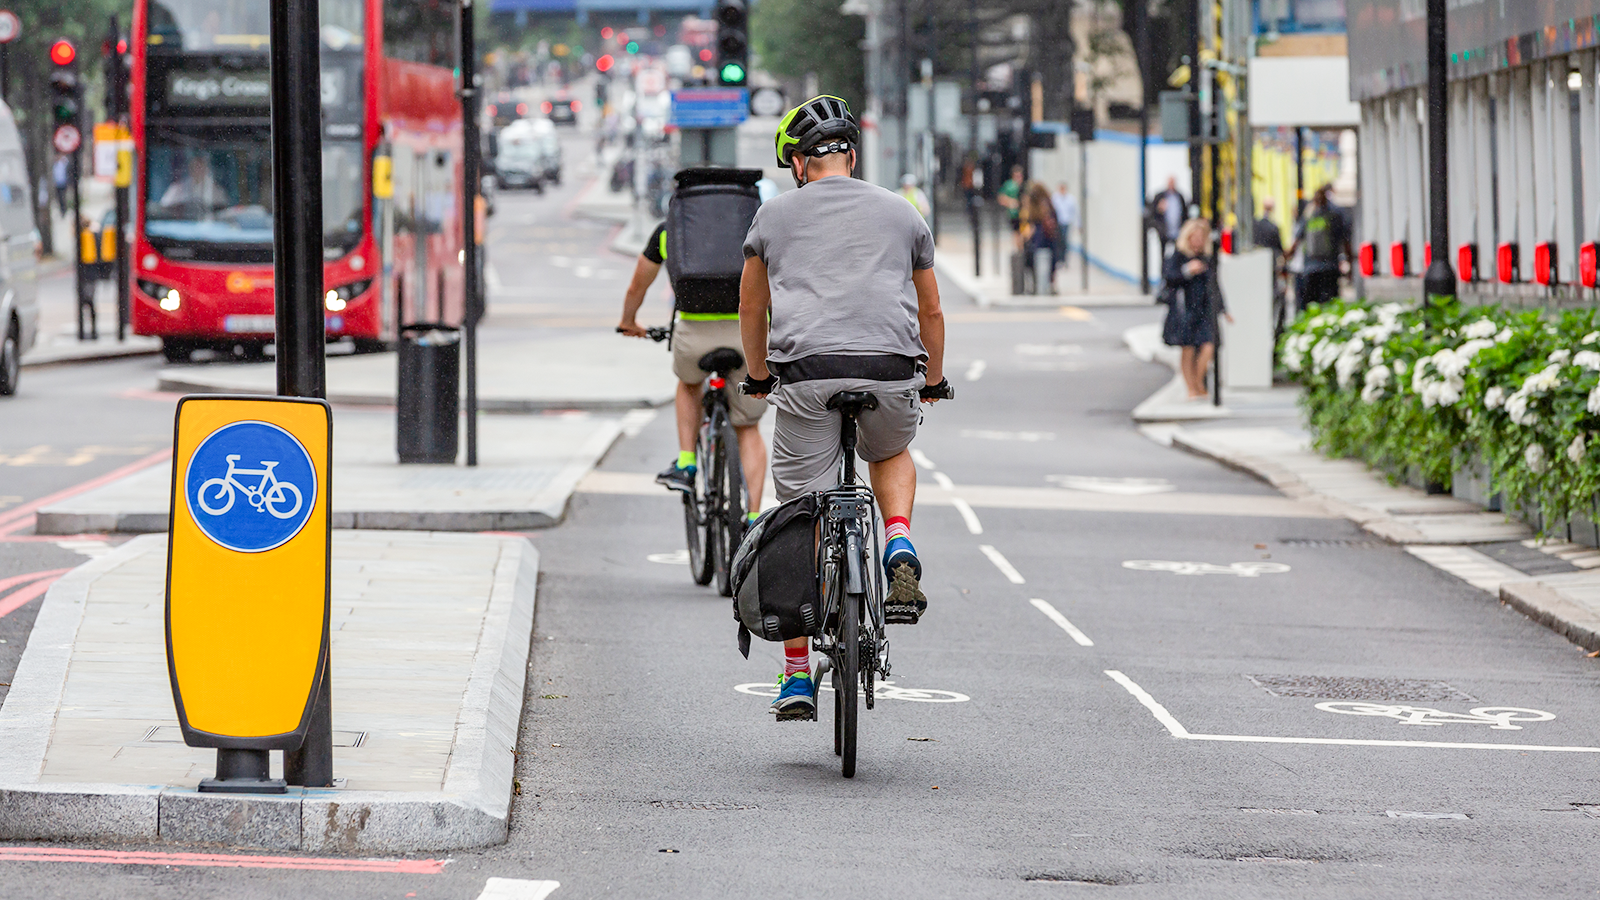 UK cycling infrastructure lagging behind Europe, study reveals